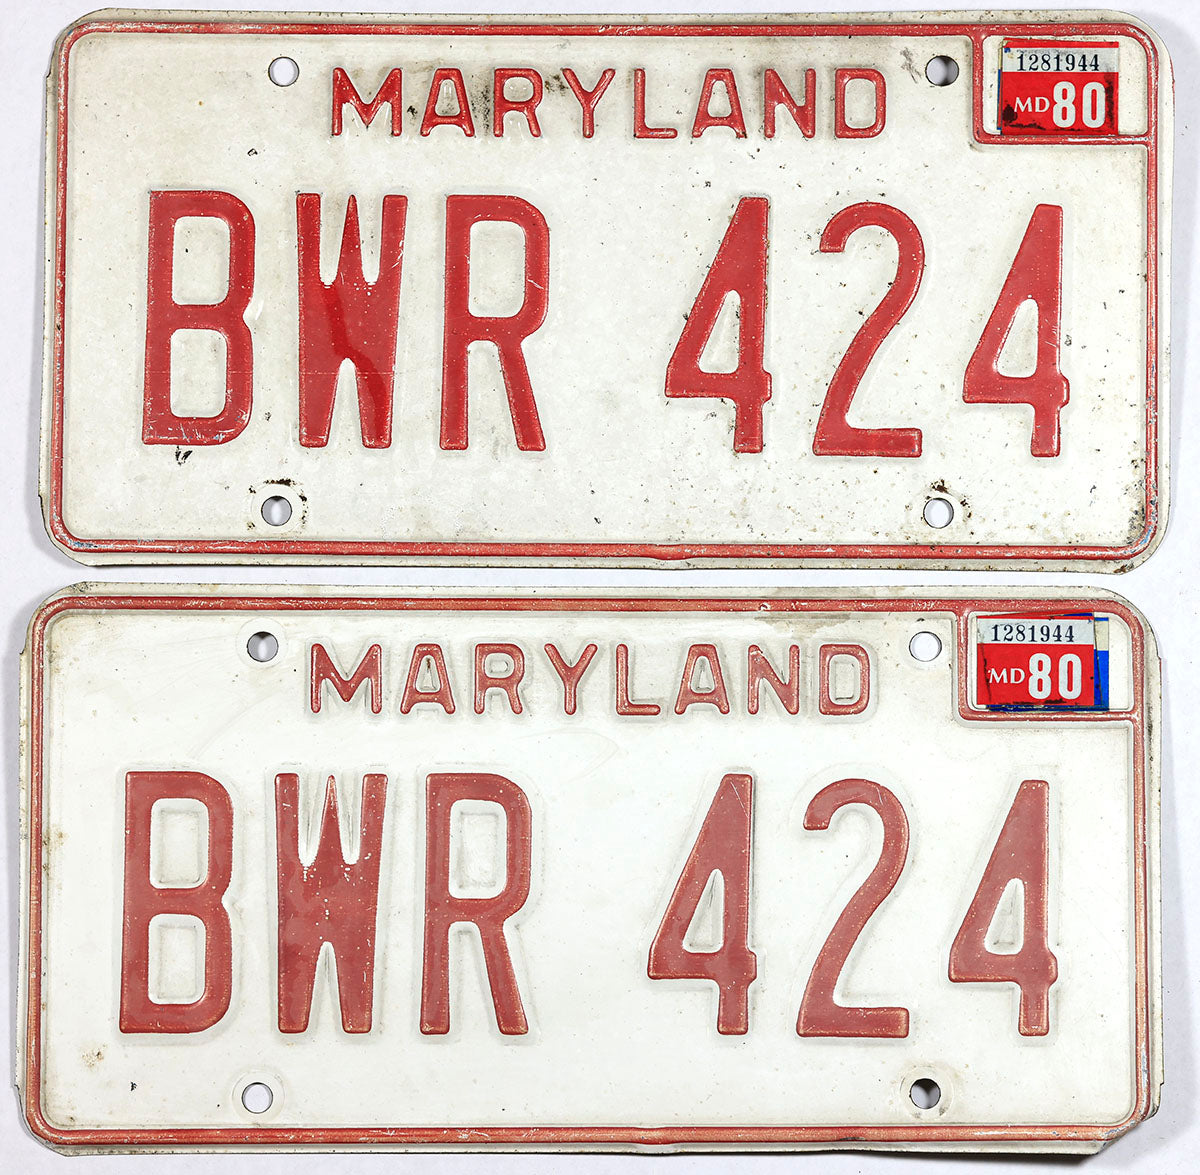 A pair of 1980 Maryland License Plates in very good minus condition